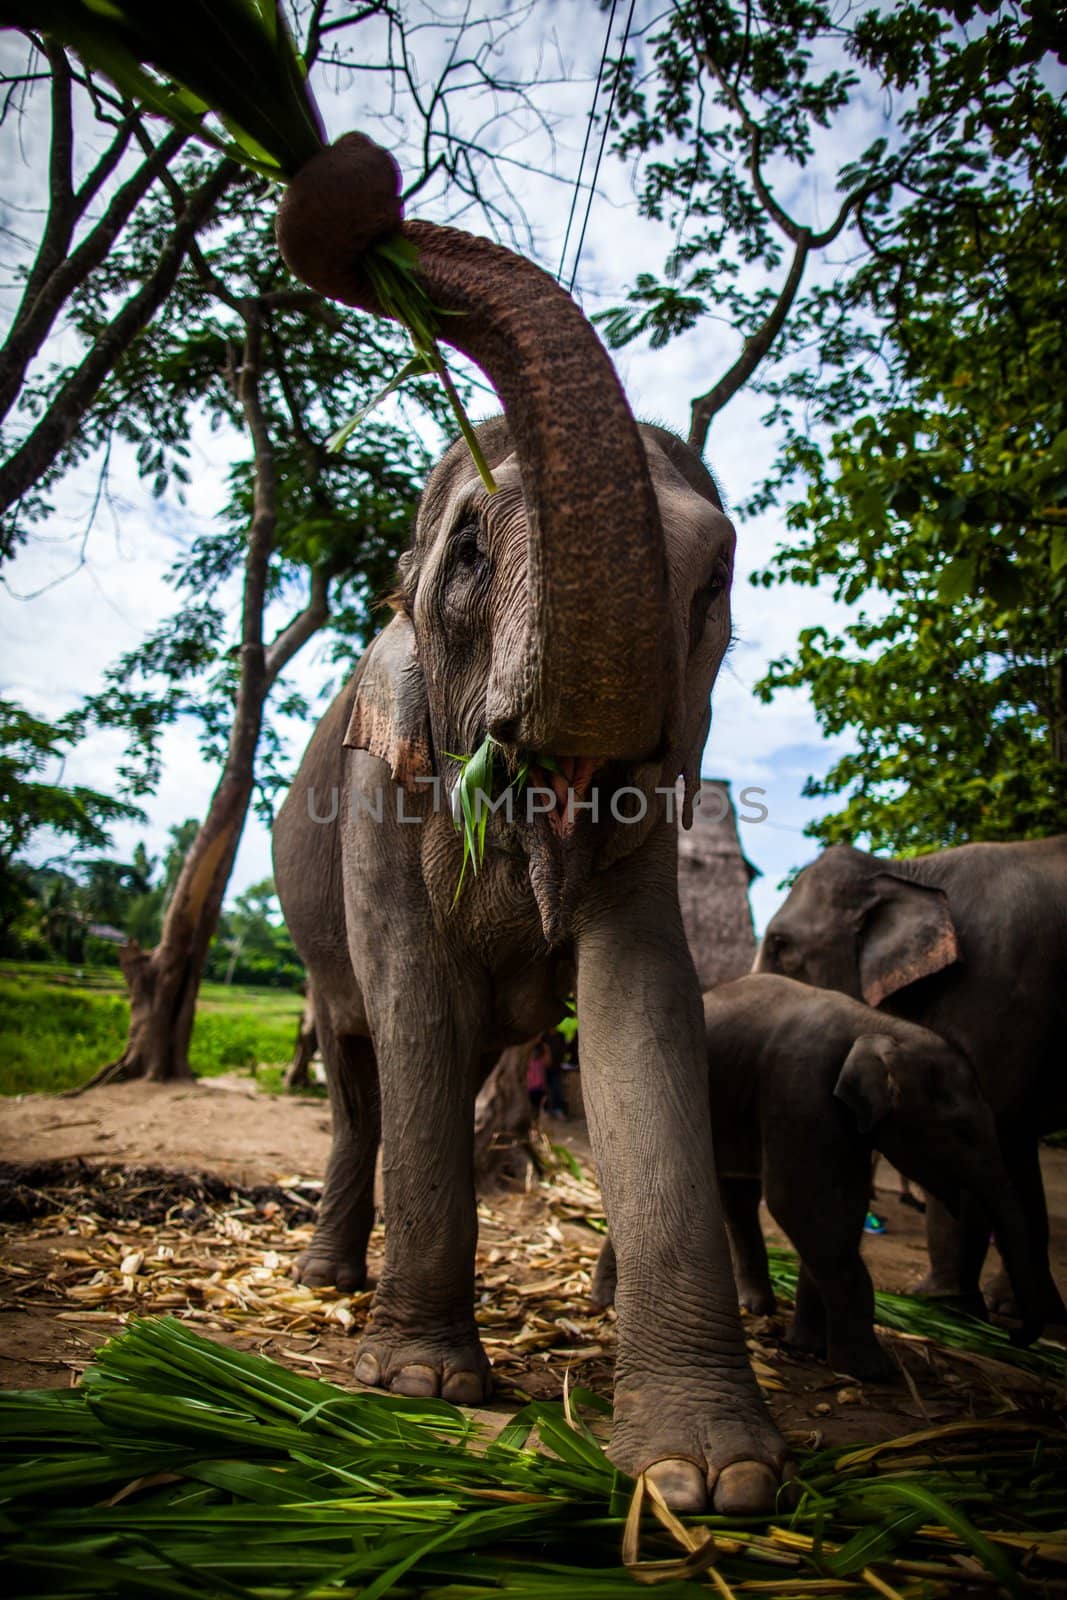 CHIANG MAI, THAILAND - June 16, 2012: Mature female elephant with sugarcane in its mouth eating off the ground. The Mahout Experience. Taking care of the elephant for a day in Chiang Mai, Thailand.